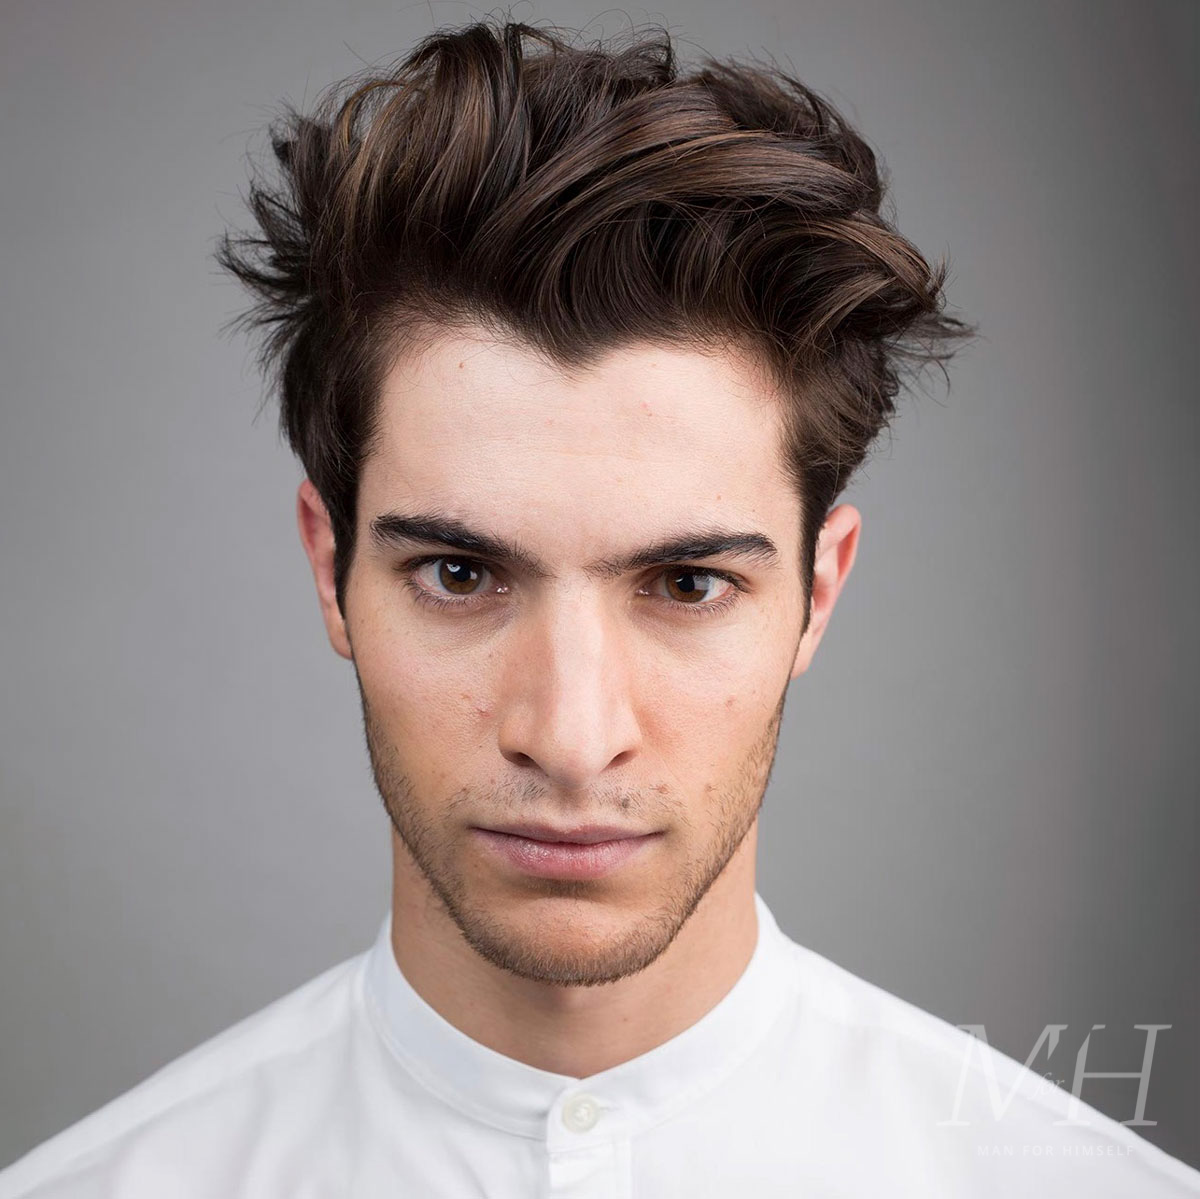 The 3 Men's Hairstyle Trends For Summer 2020 | Man For Himself